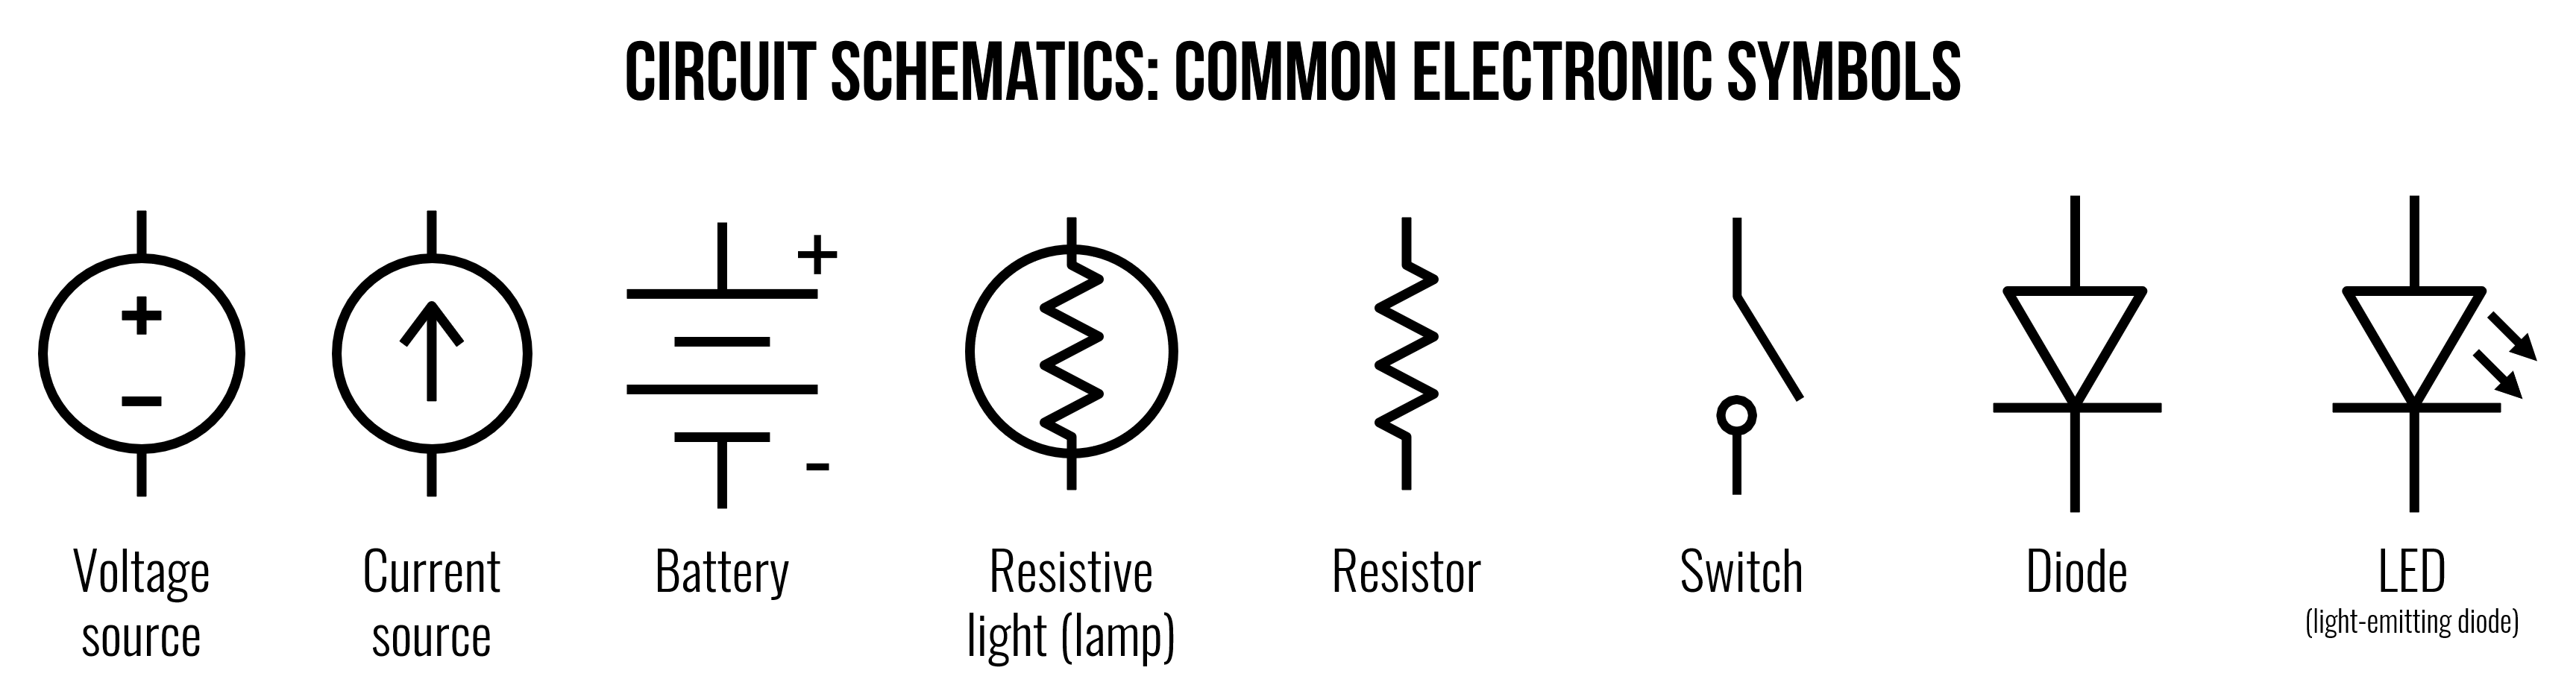 An image showing the electronic symbol for voltage source, current source, battery, resistive light (lamp), resistor, switch, diode, and LED